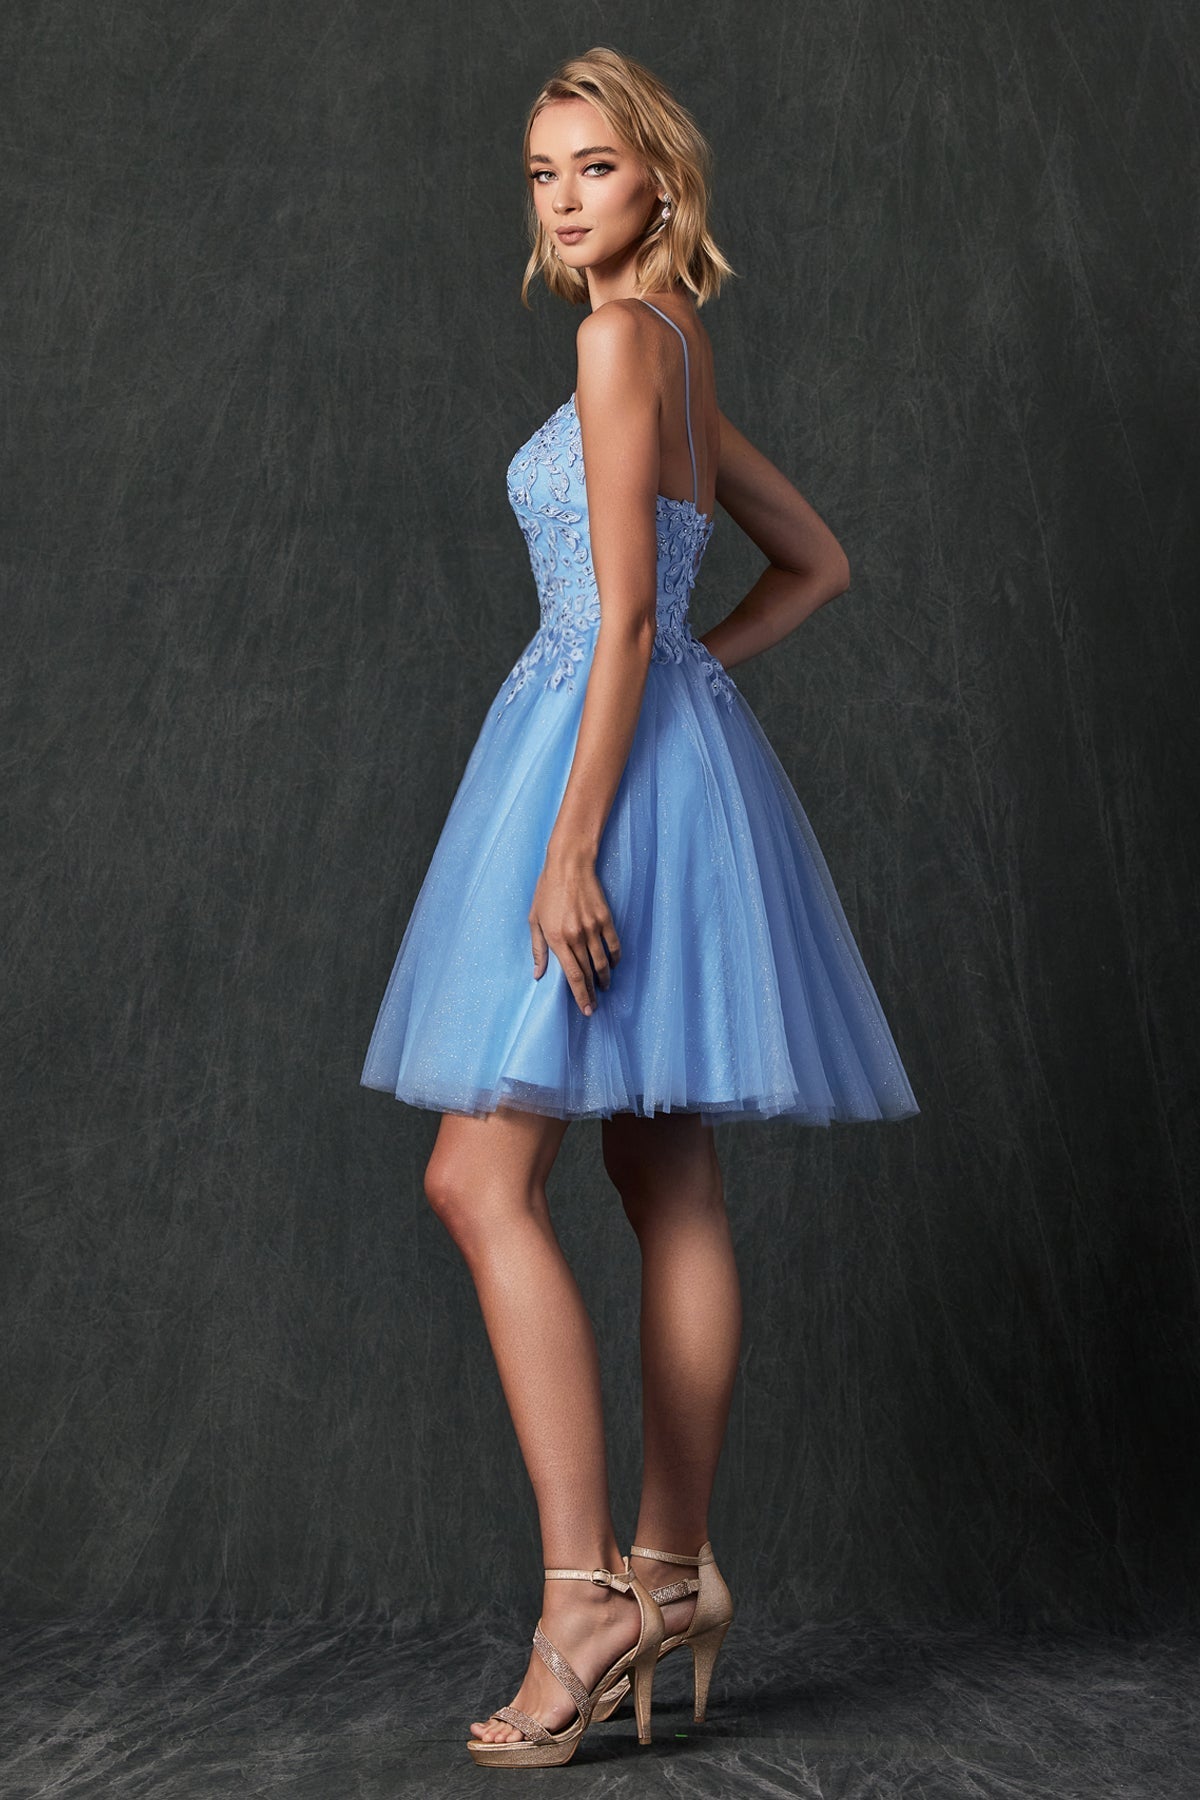 Spaghetti Straps Embroidered Bodice Short Cocktail & Homecoming Dress JT860 Elsy Style Cocktail Dress